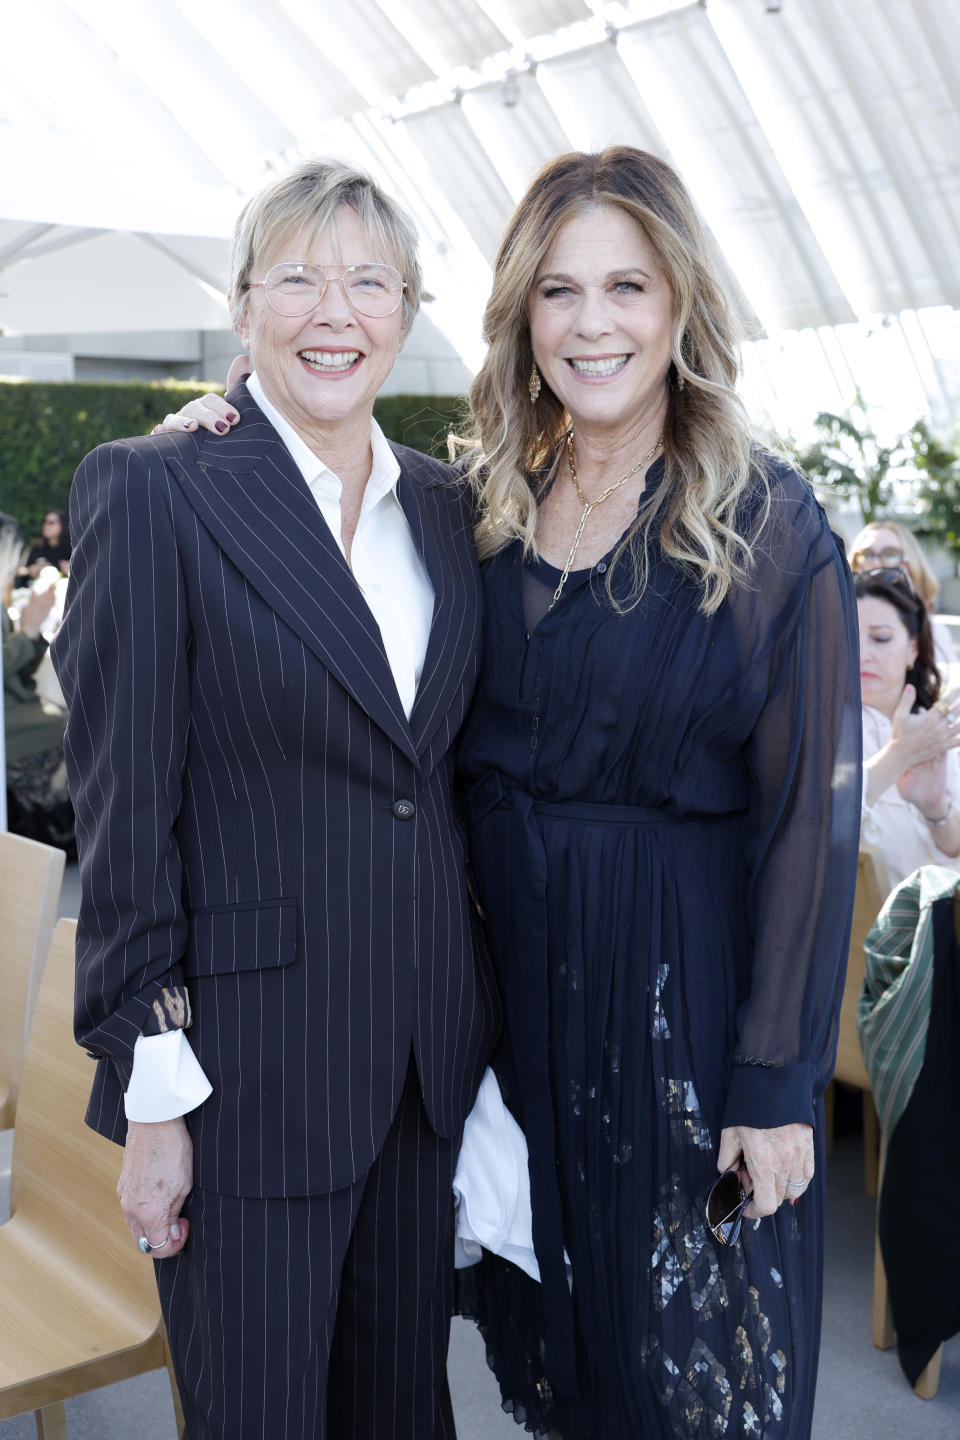 LOS ANGELES, CALIFORNIA - NOVEMBER 09: (L-R) Annette Bening and Rita Wilson attend the Academy Women's Luncheon Presented By CHANEL at the Academy Museum of Motion Pictures on November 09, 2023 in Los Angeles, California. (Photo by Stefanie Keenan/WireImage)